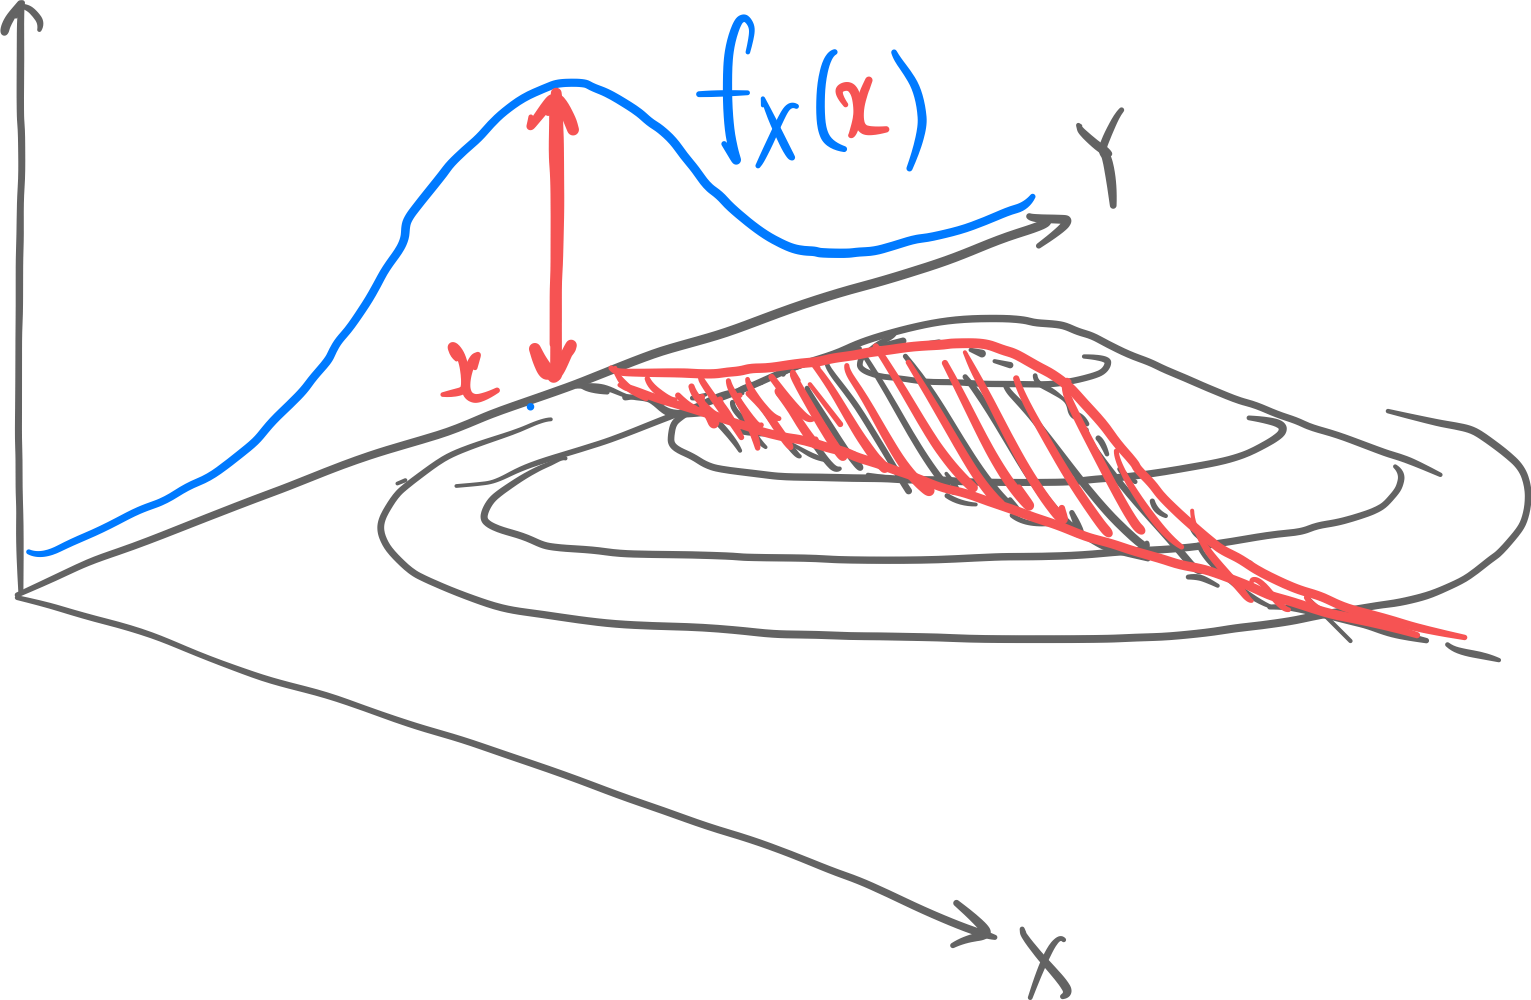 The red area is the marginal probability density at x.